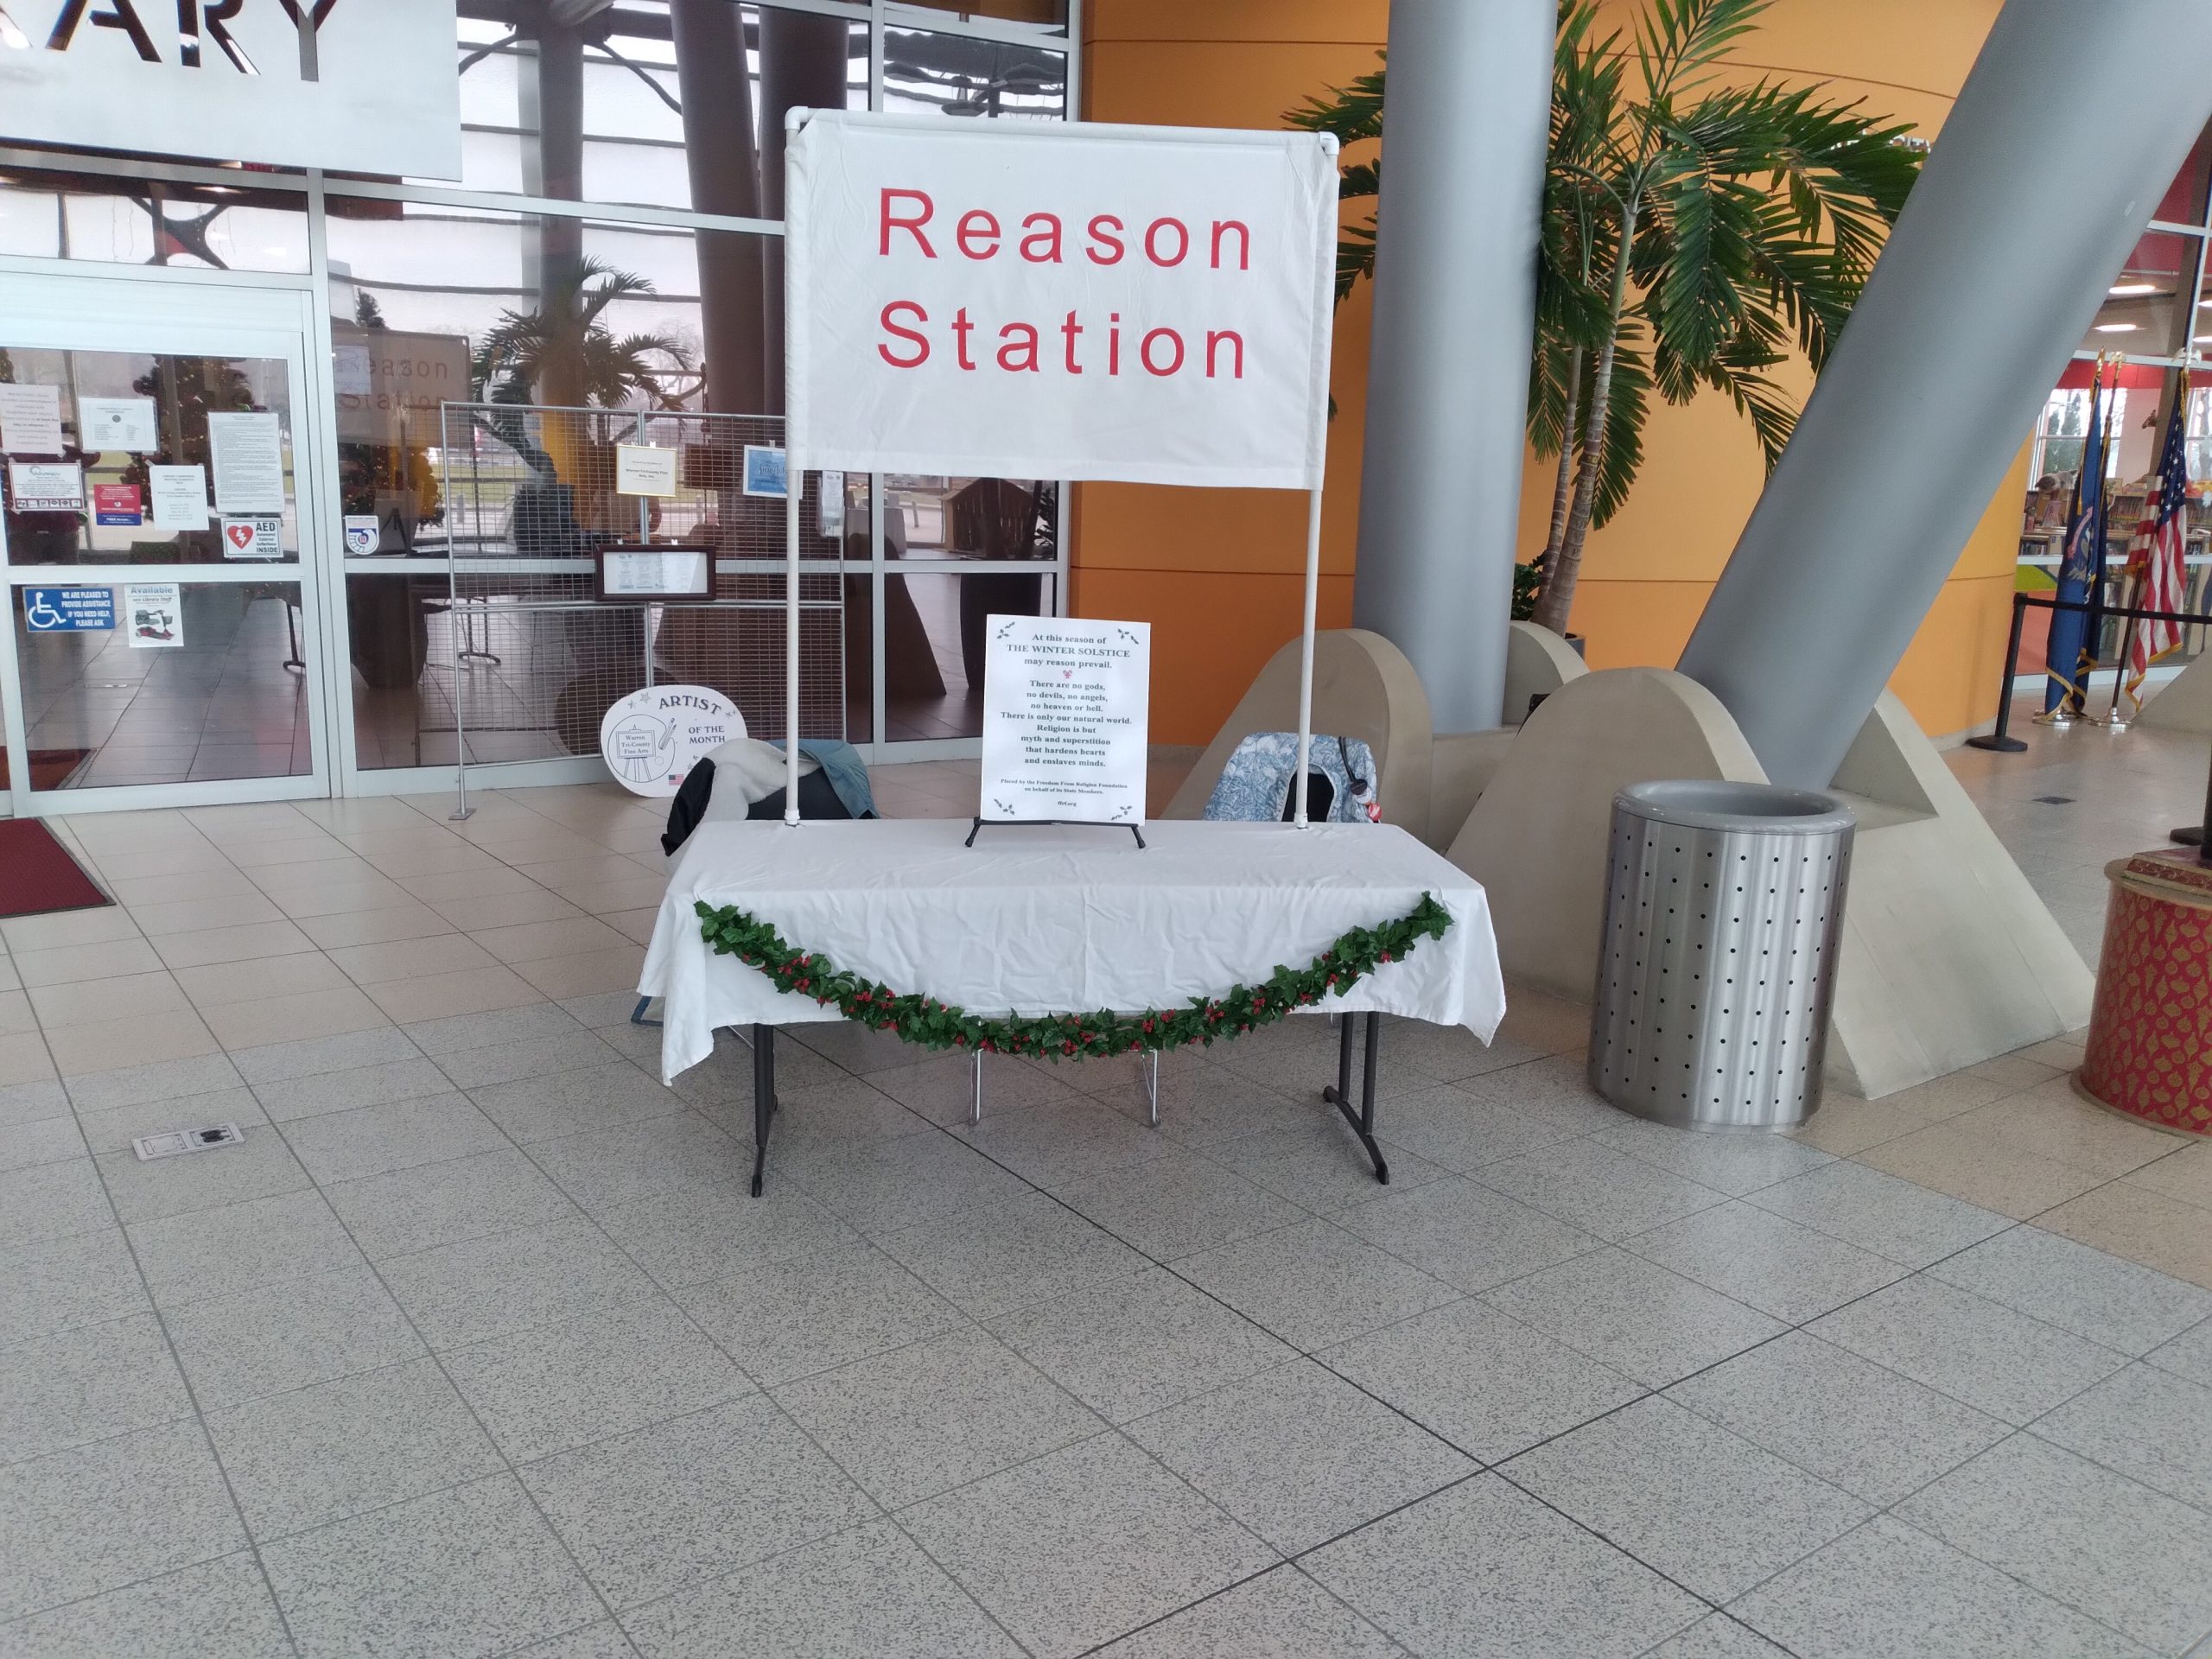 A table outside a building with a banner above it reading "Reason Station"